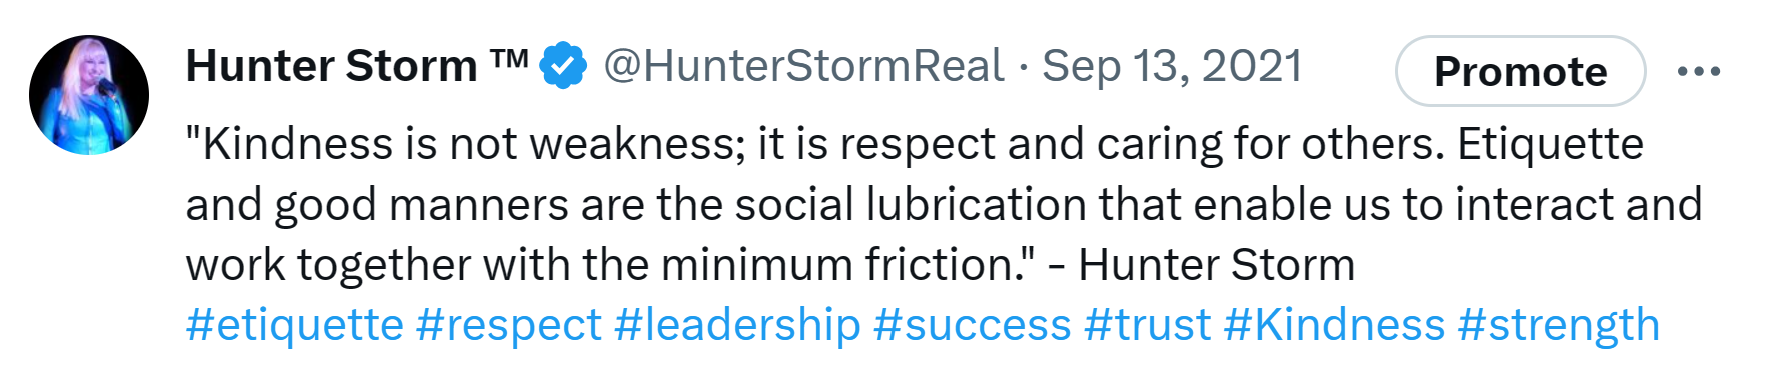 Hunter Storm Wisdom: Timeless Insights and Inspiration | "Kindness is not weakness; it is respect and caring for others. Etiquette and good manners are the social lubrication that enable us to interact and work together with the minimum friction."